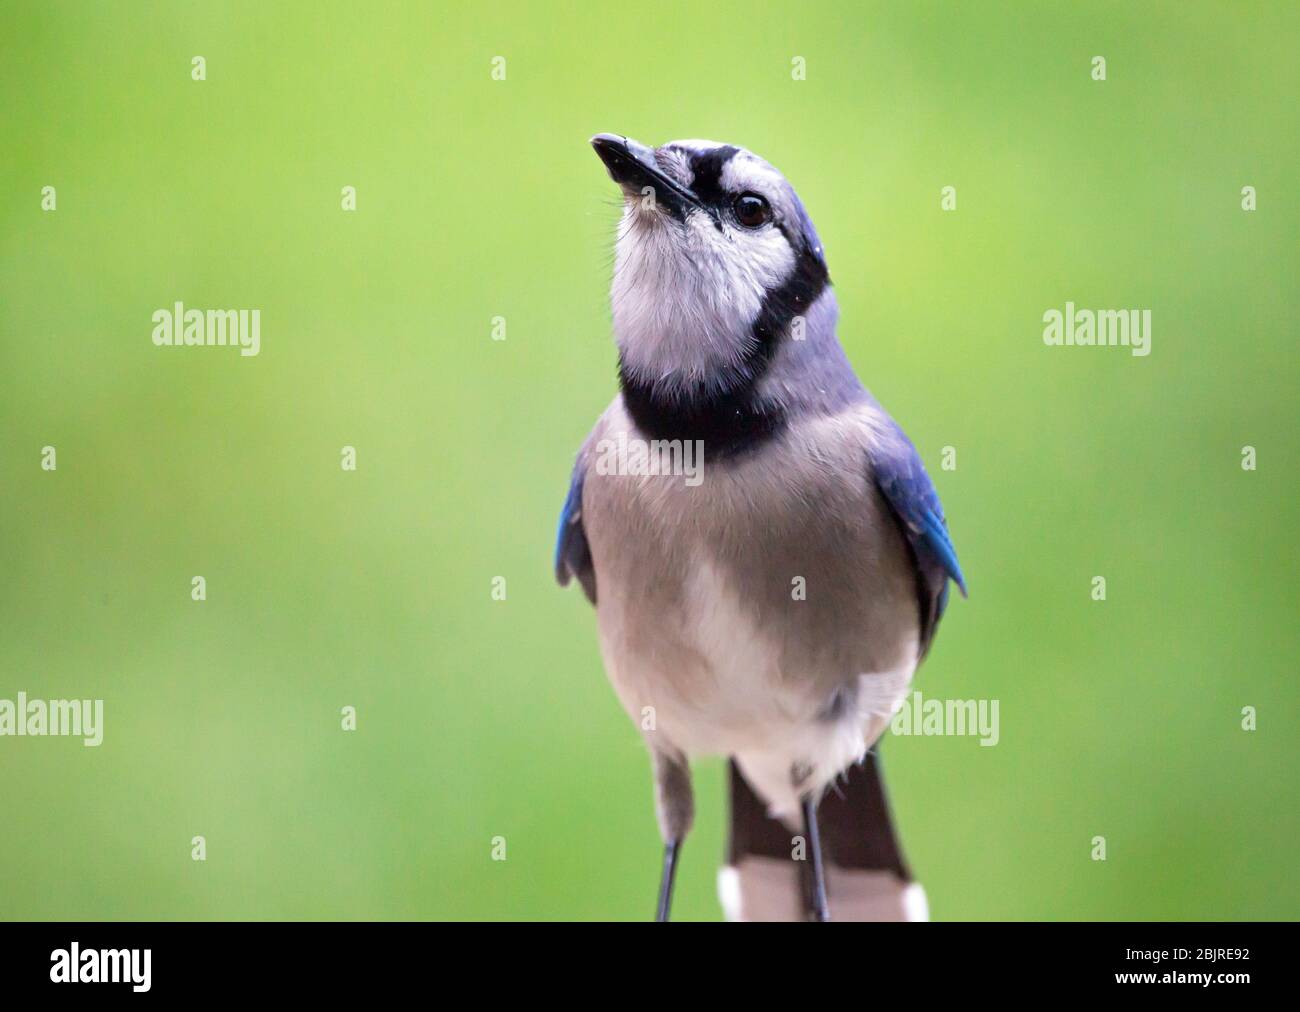 Closeup of a perched Blue Jay bird with a bright green background Stock ...